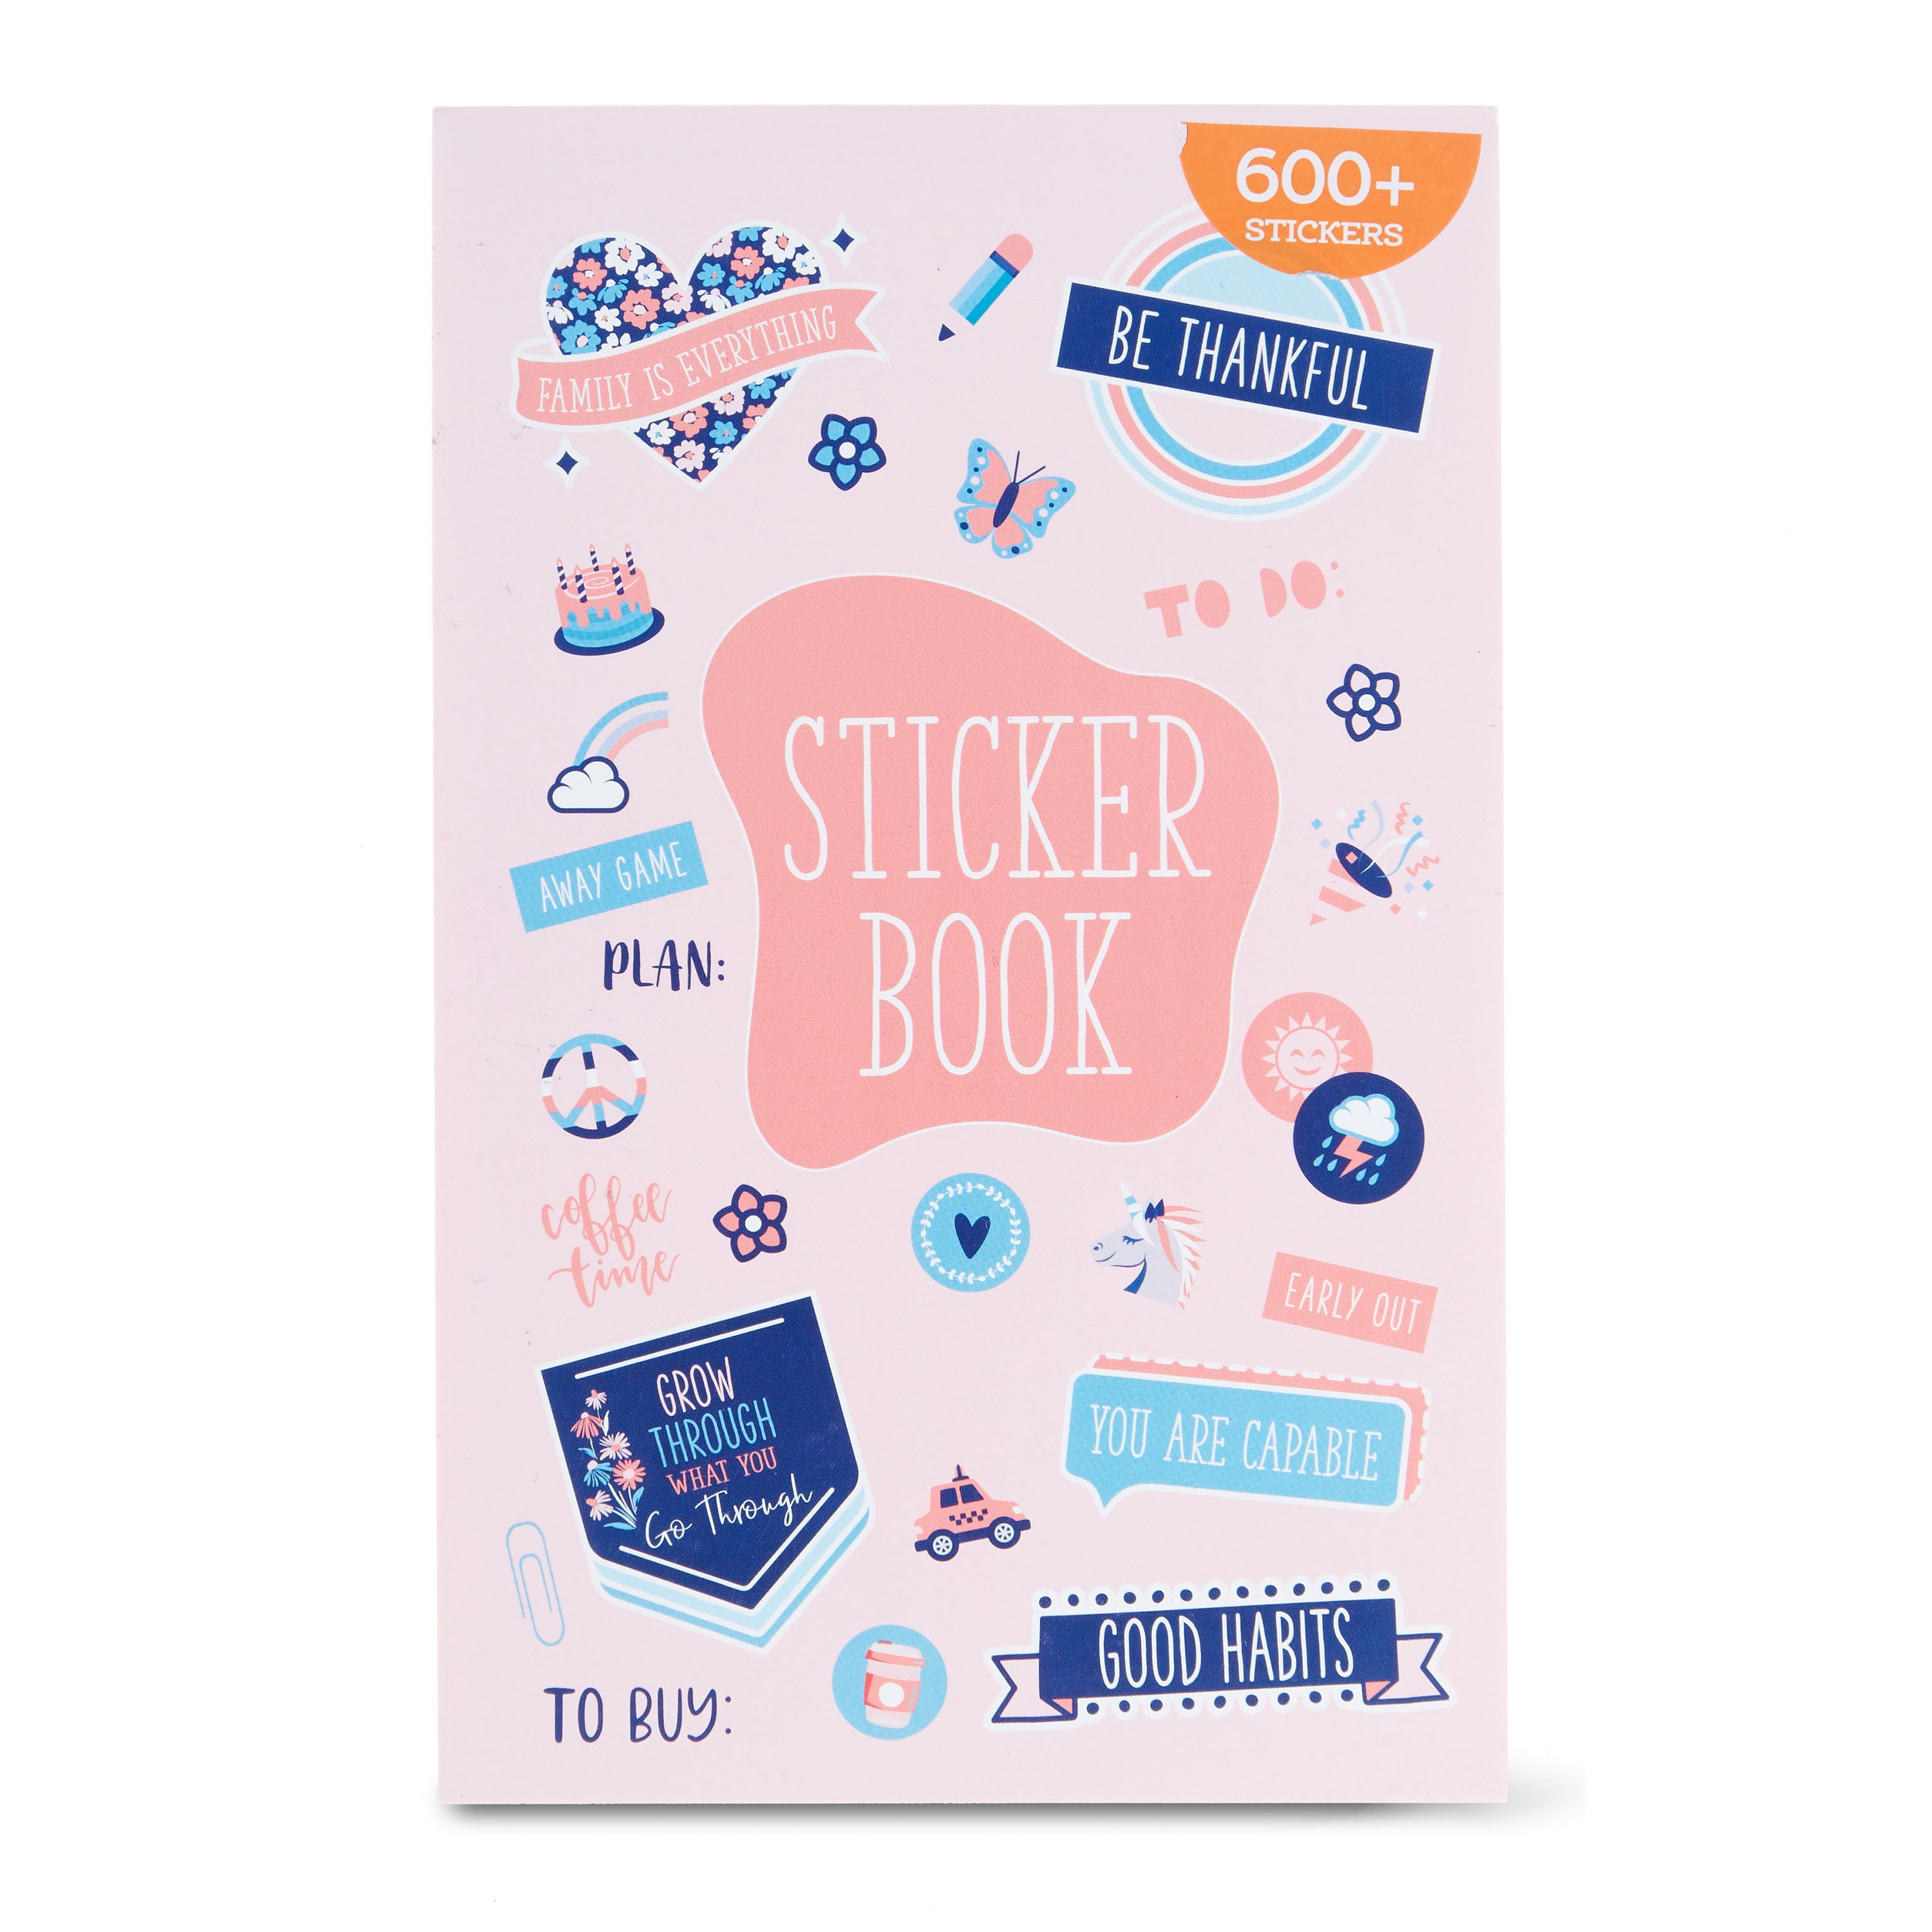 Pen+Gear Paper Sticker Book, Pink and Blue, 15 Sheets, 600+ Stickers